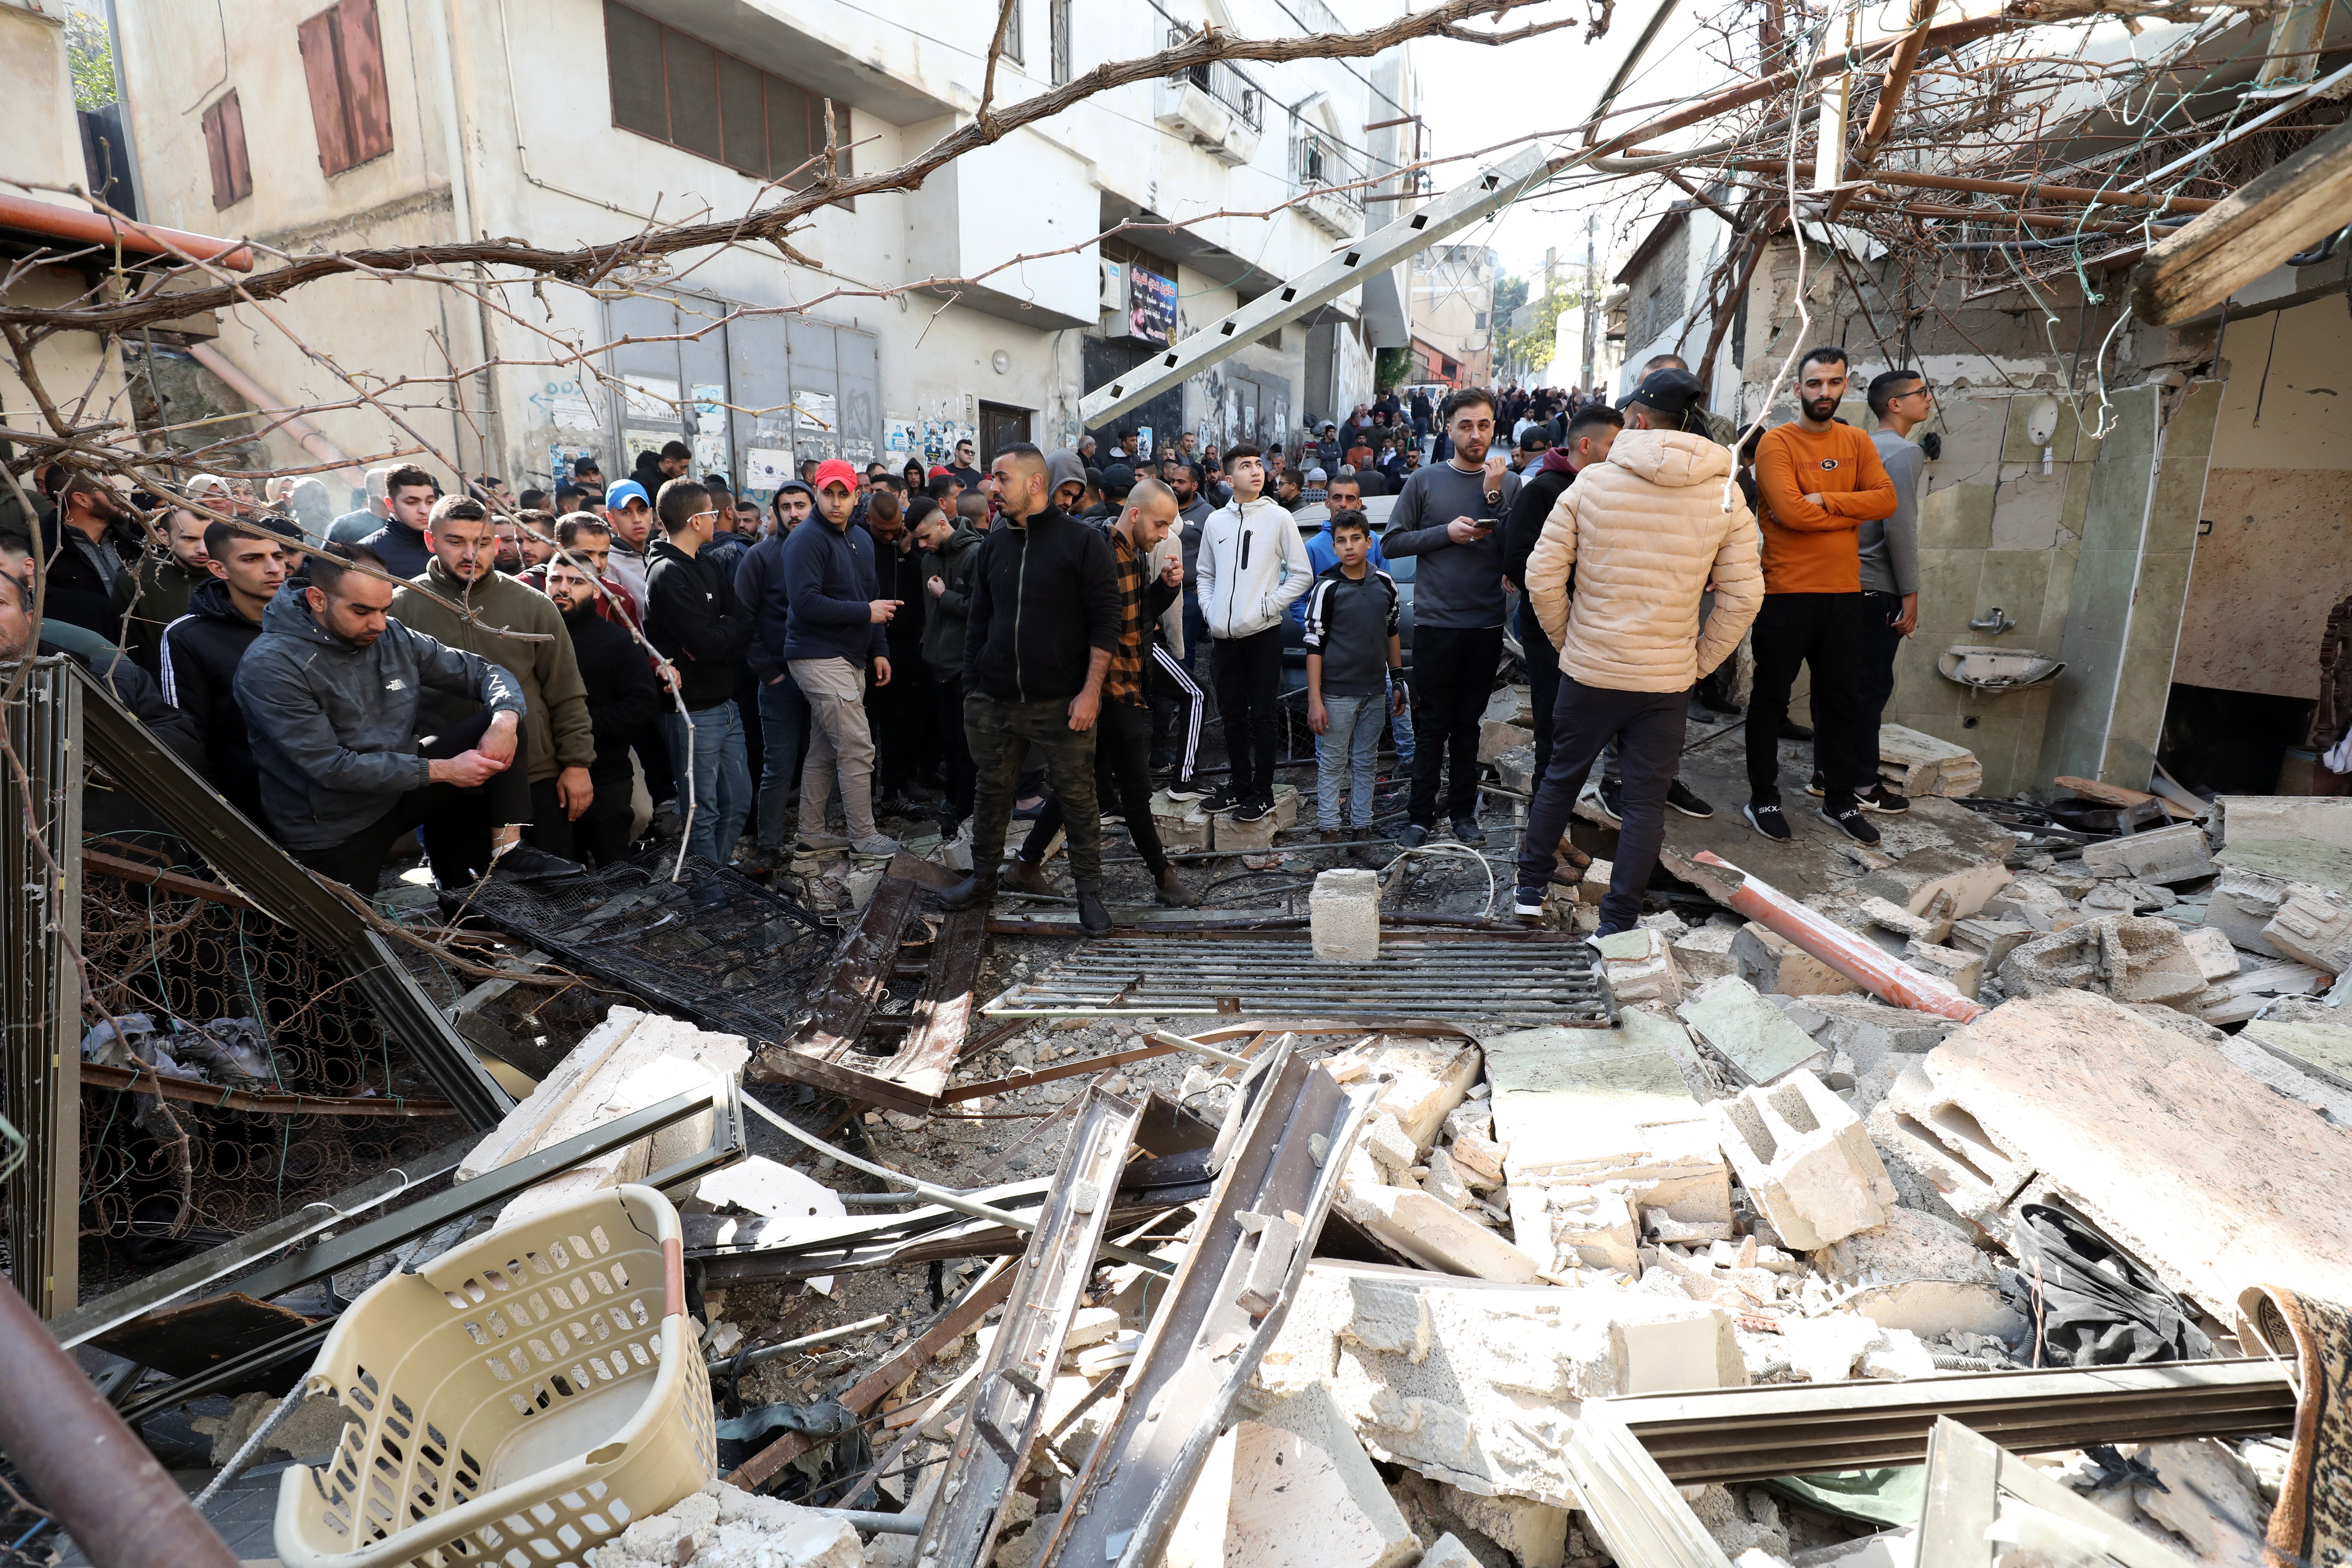 The aftermath of the attack in Jenin on Thursday